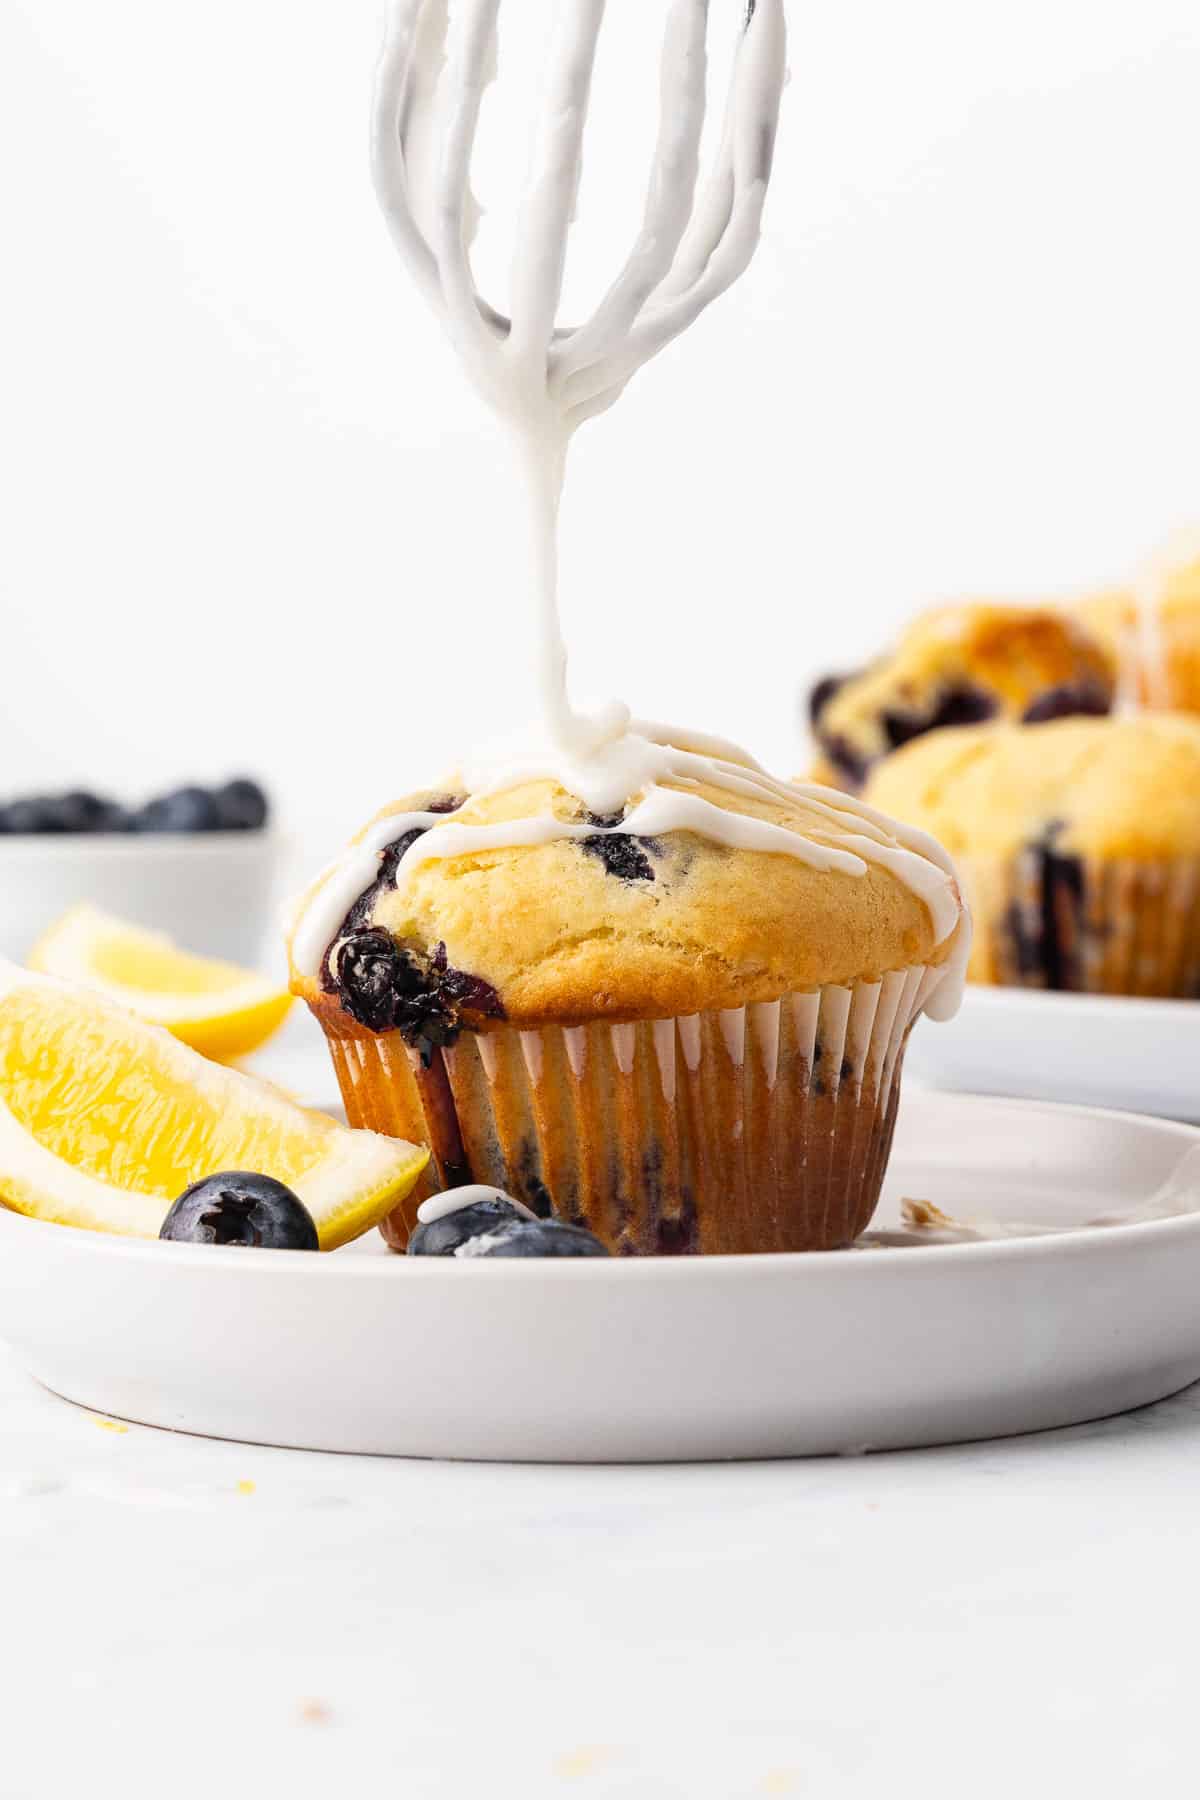 A whisk drizzling glaze onto a lemon blueberry muffin on a plate.